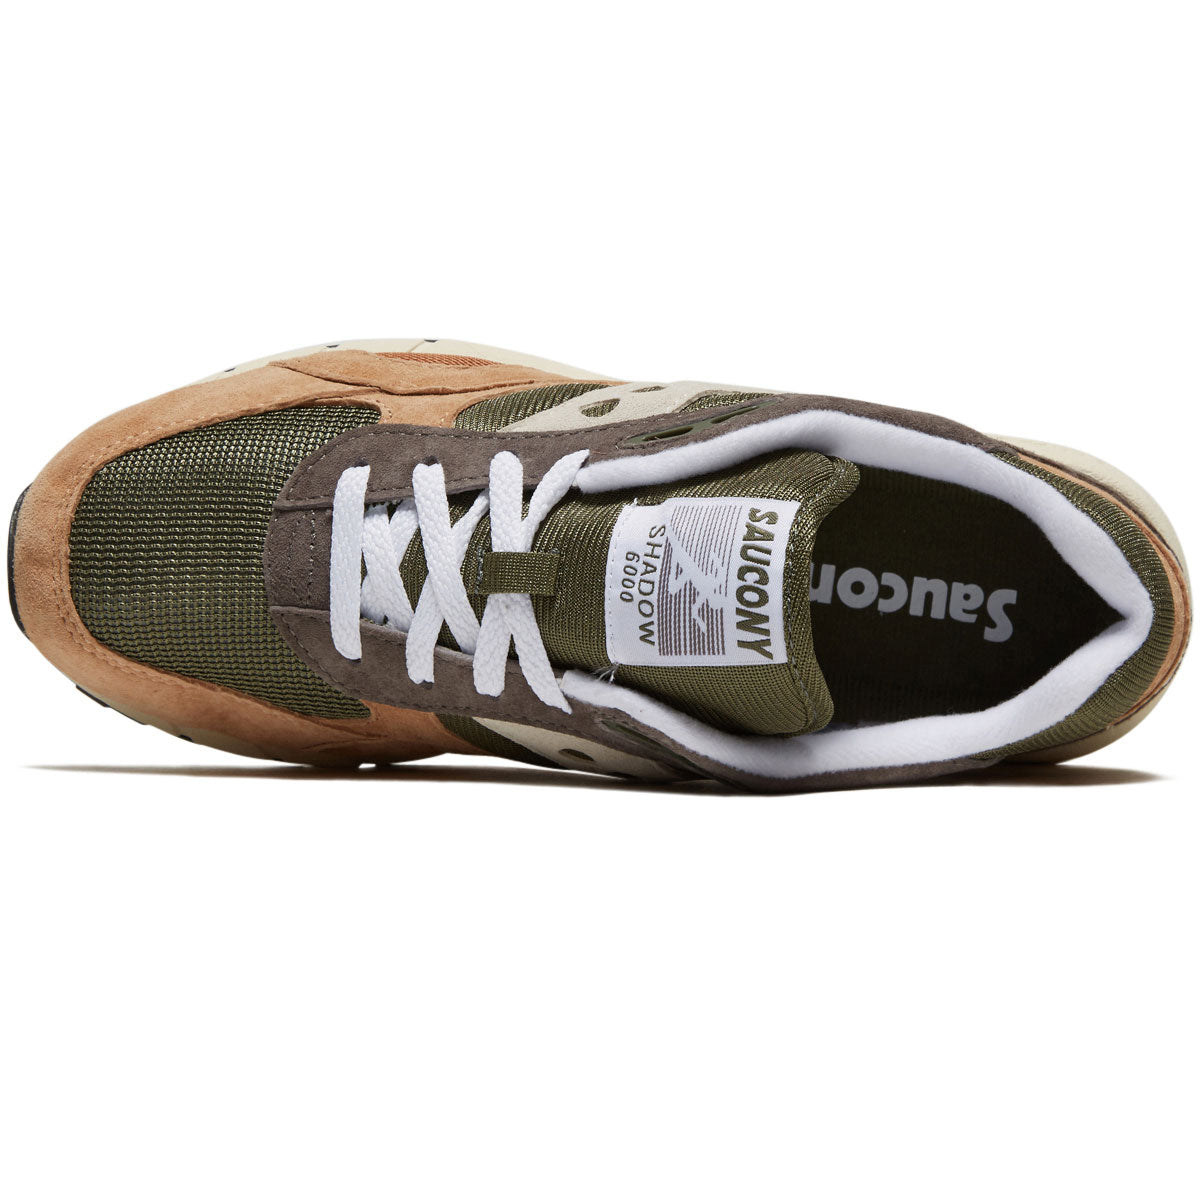 Saucony Shadow 6000 Shoes - Green/Brown image 3